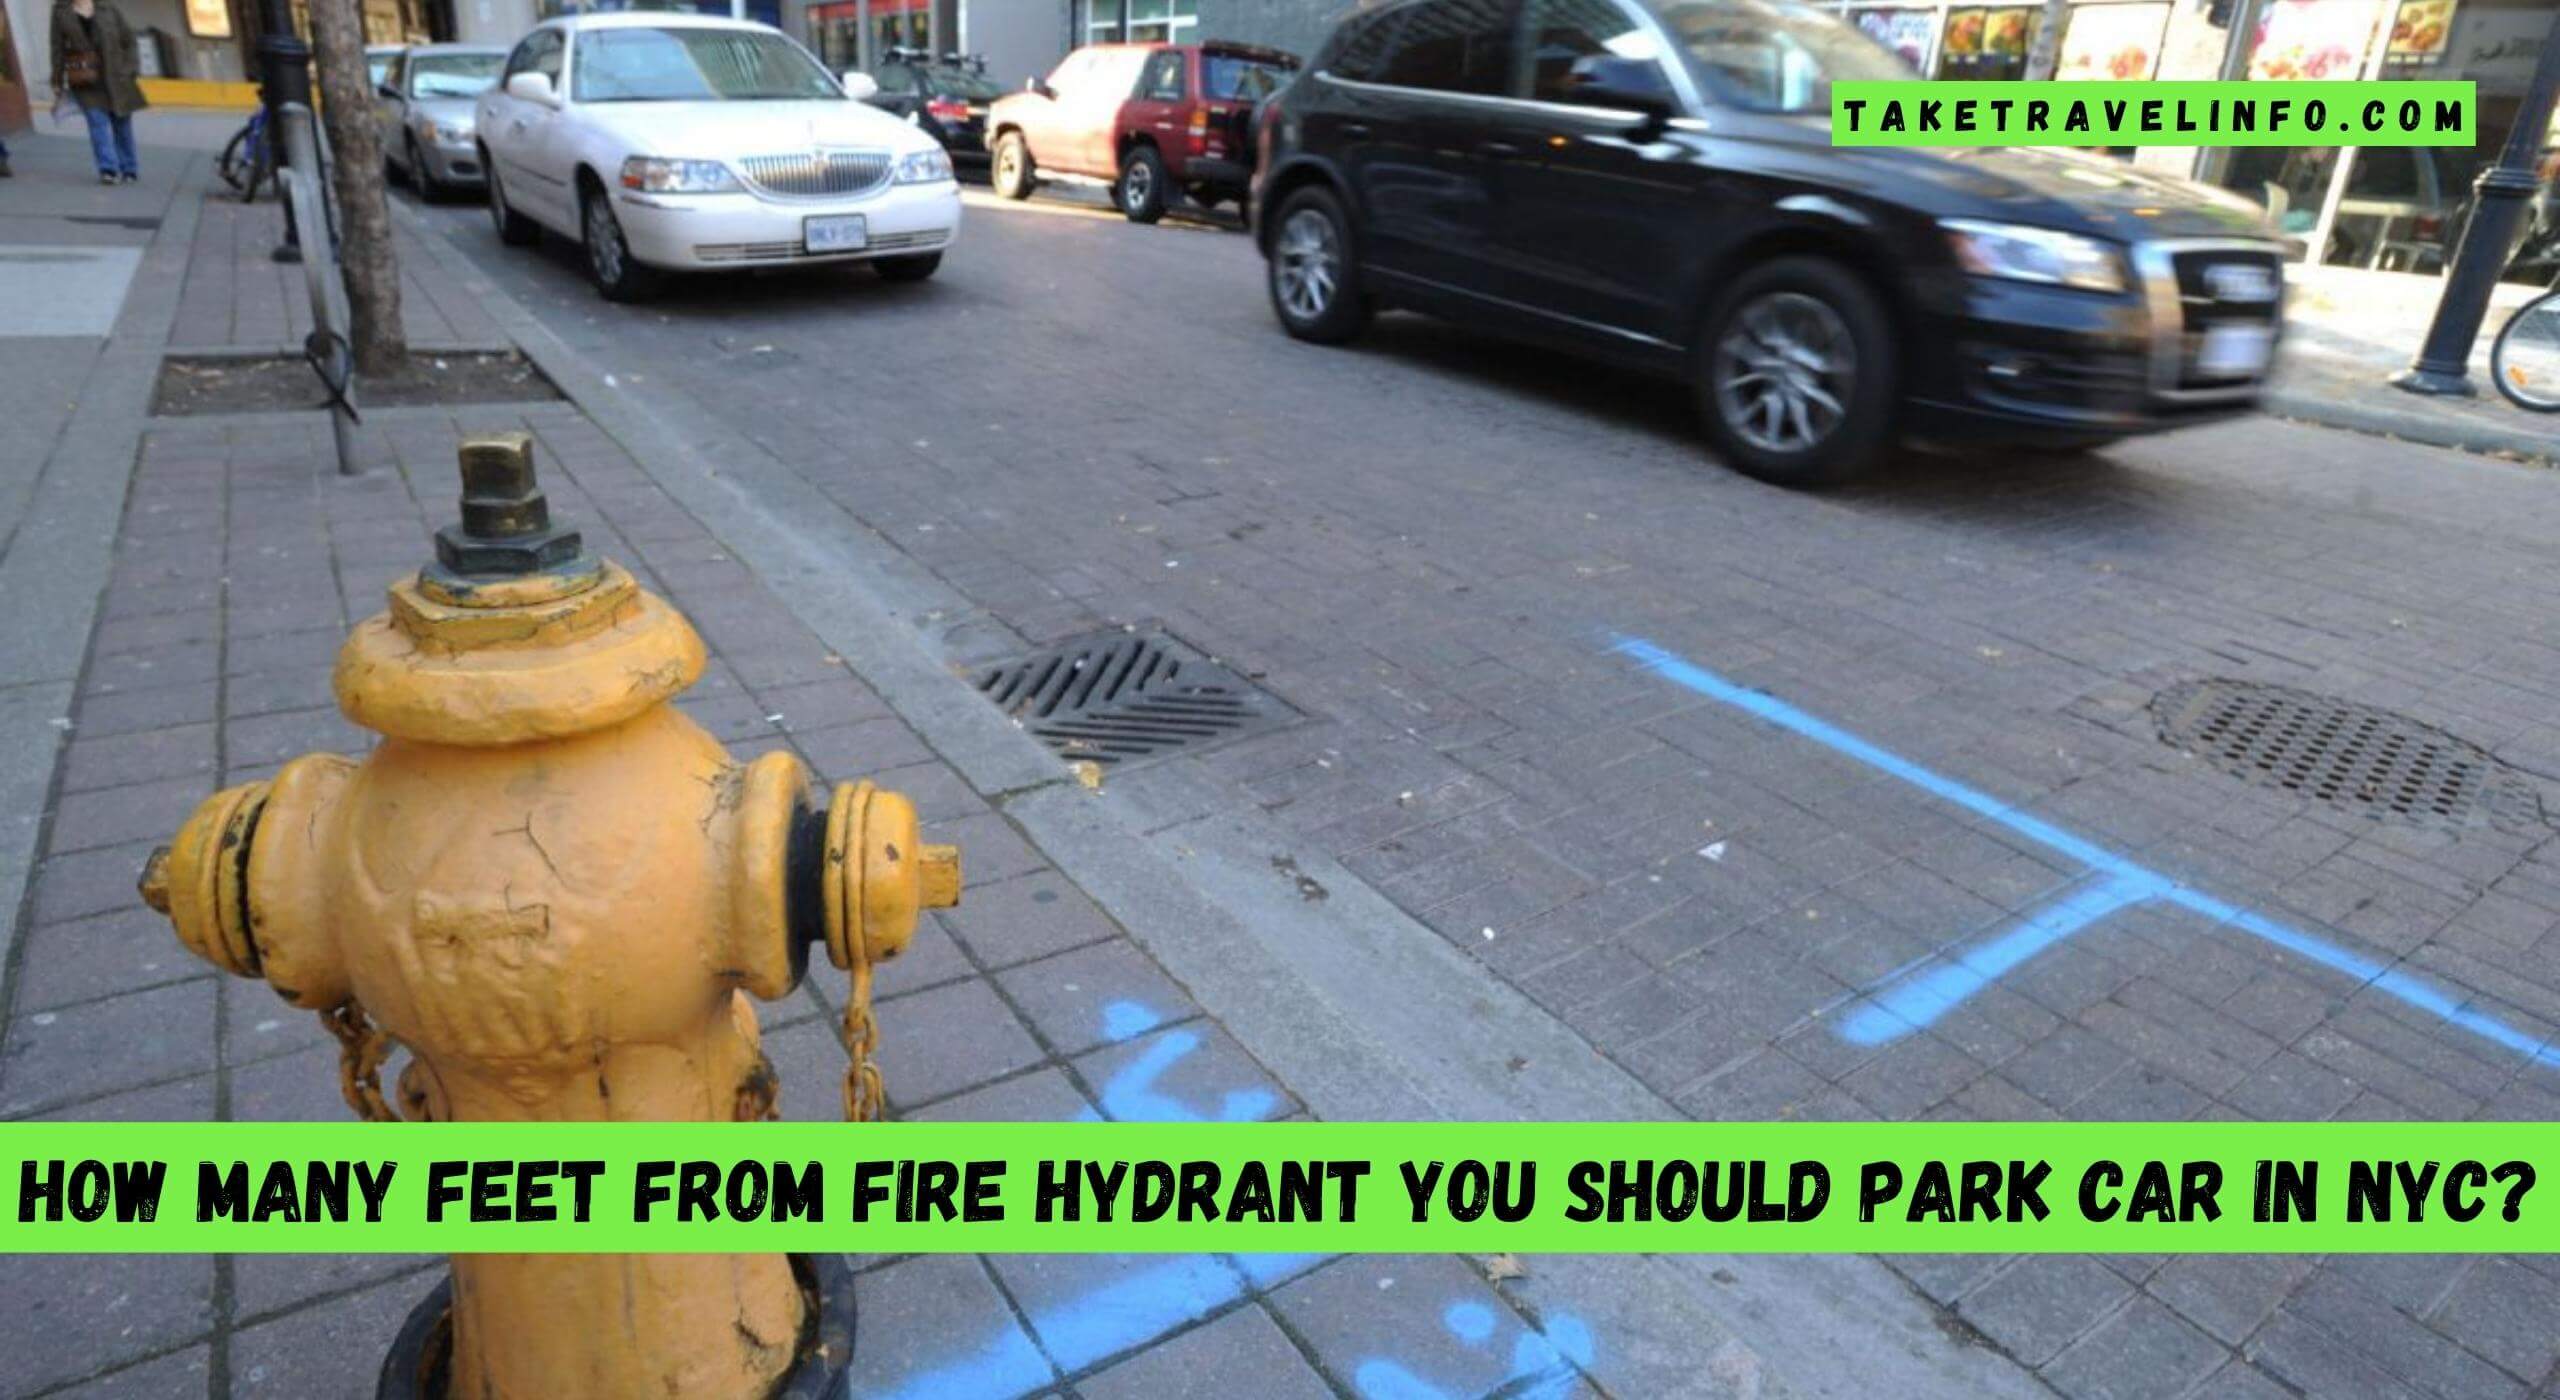 How Many Feet from Fire Hydrant You Should Park Car In Nyc?